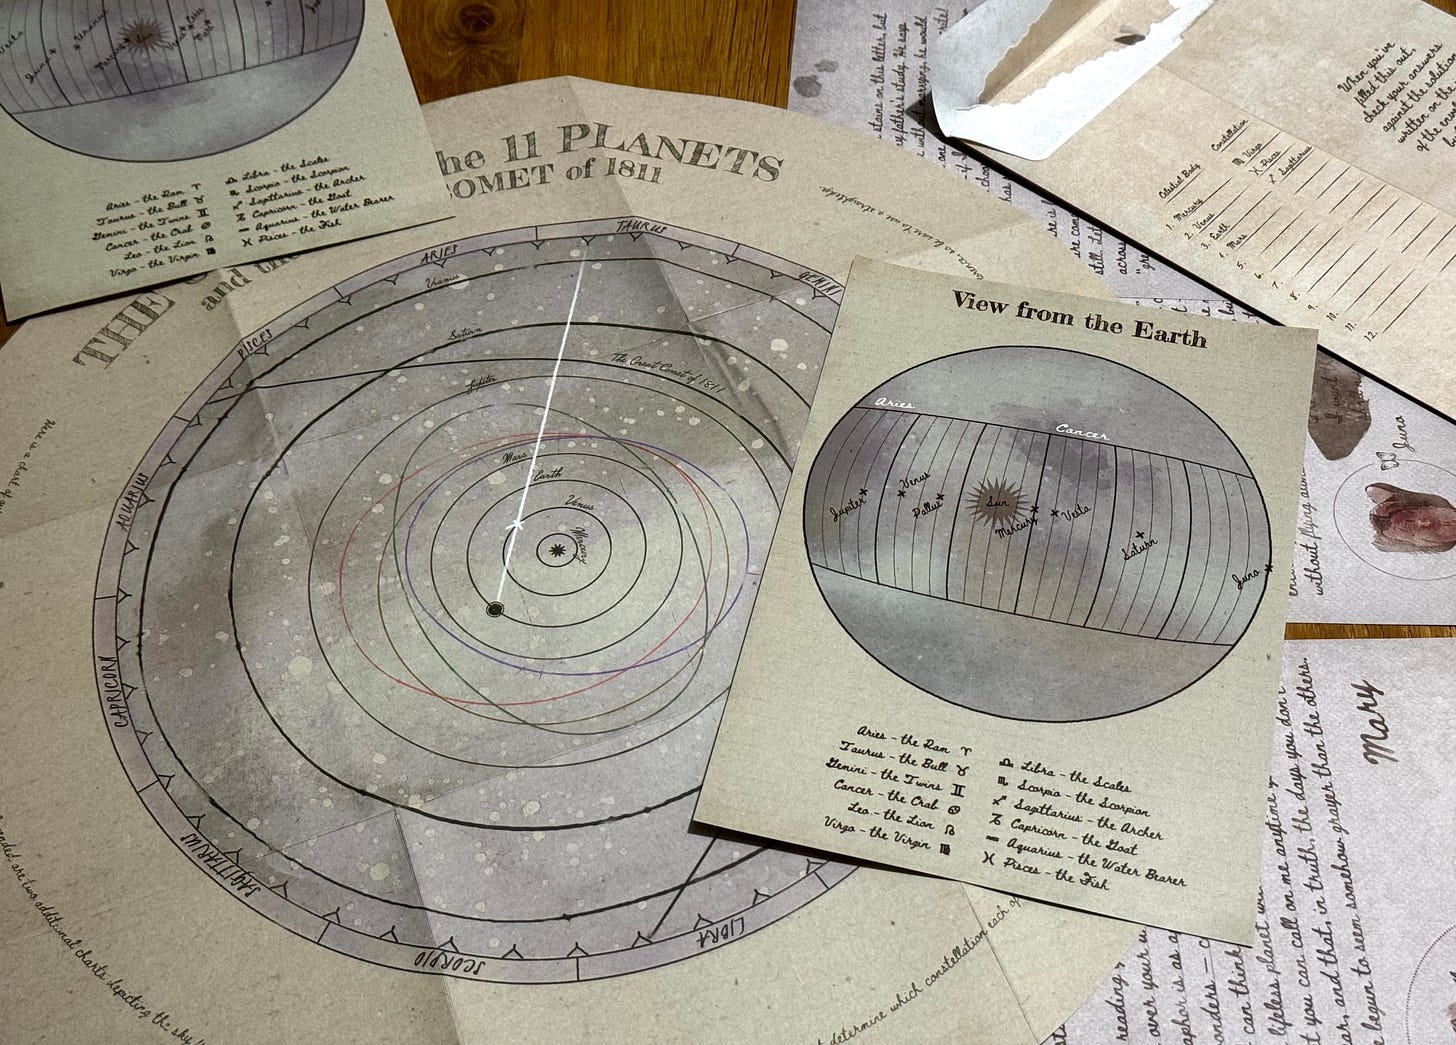 Sheets of paper on a table including maps of stars and planets and letters